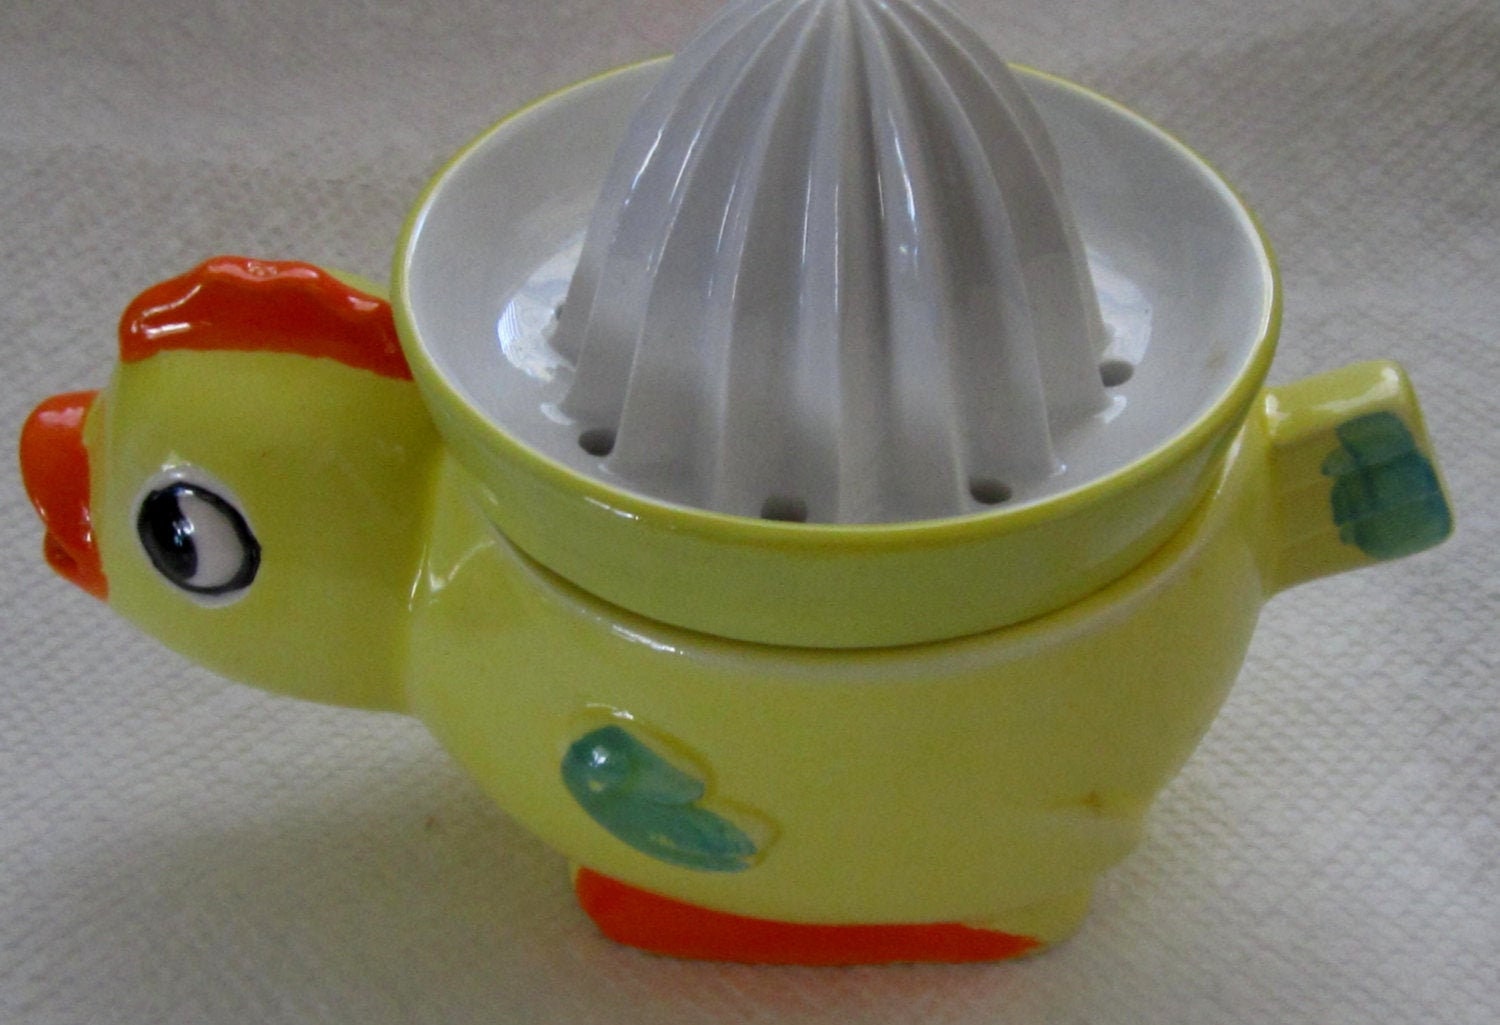 Vintage Sunny Yellow Juicer, Glass Citrus Juicer With 2 Cup Container,  Citrus Reamer, Vintage Cooking Accessory -  Finland